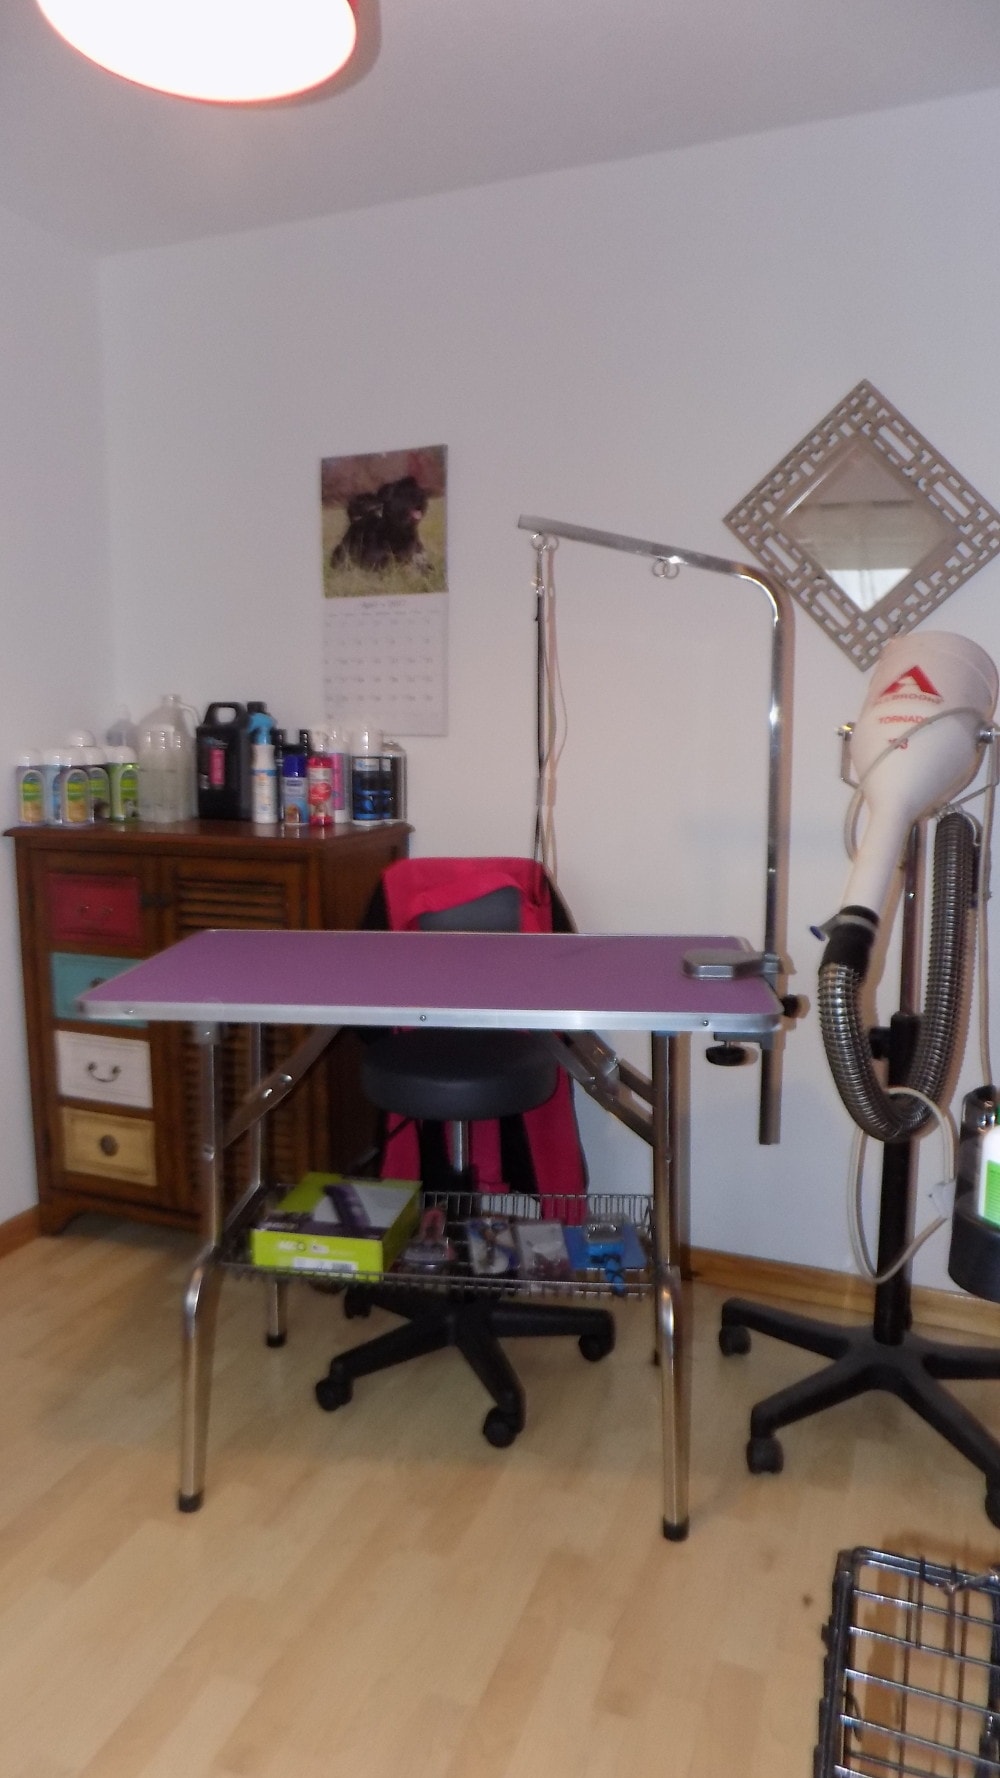 Dog grooming salon with various cleaning supplies